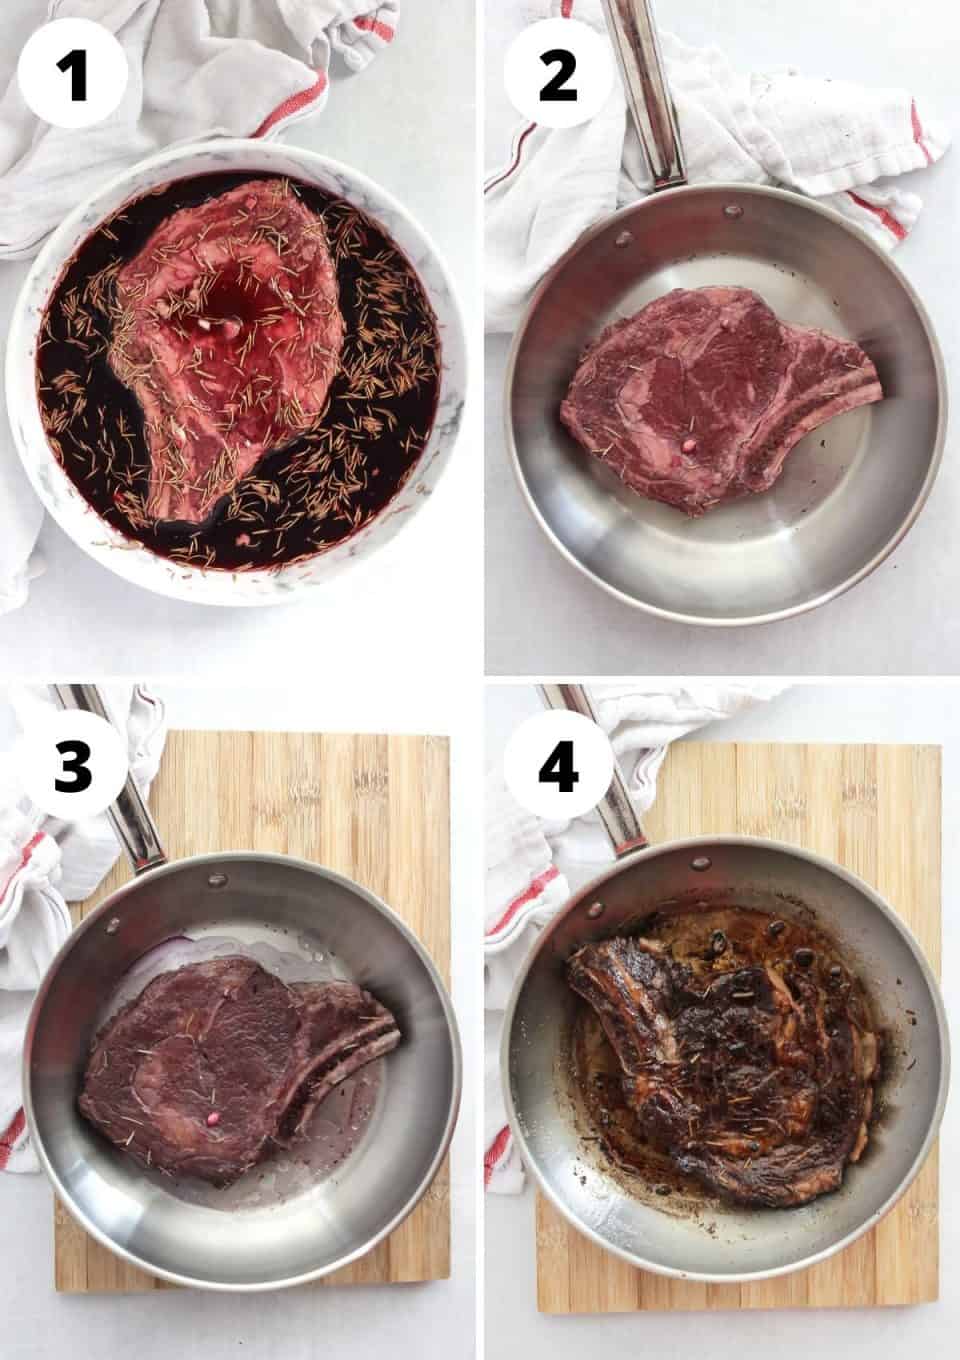 Four step by step photos to show how to marinate and cook the steak.